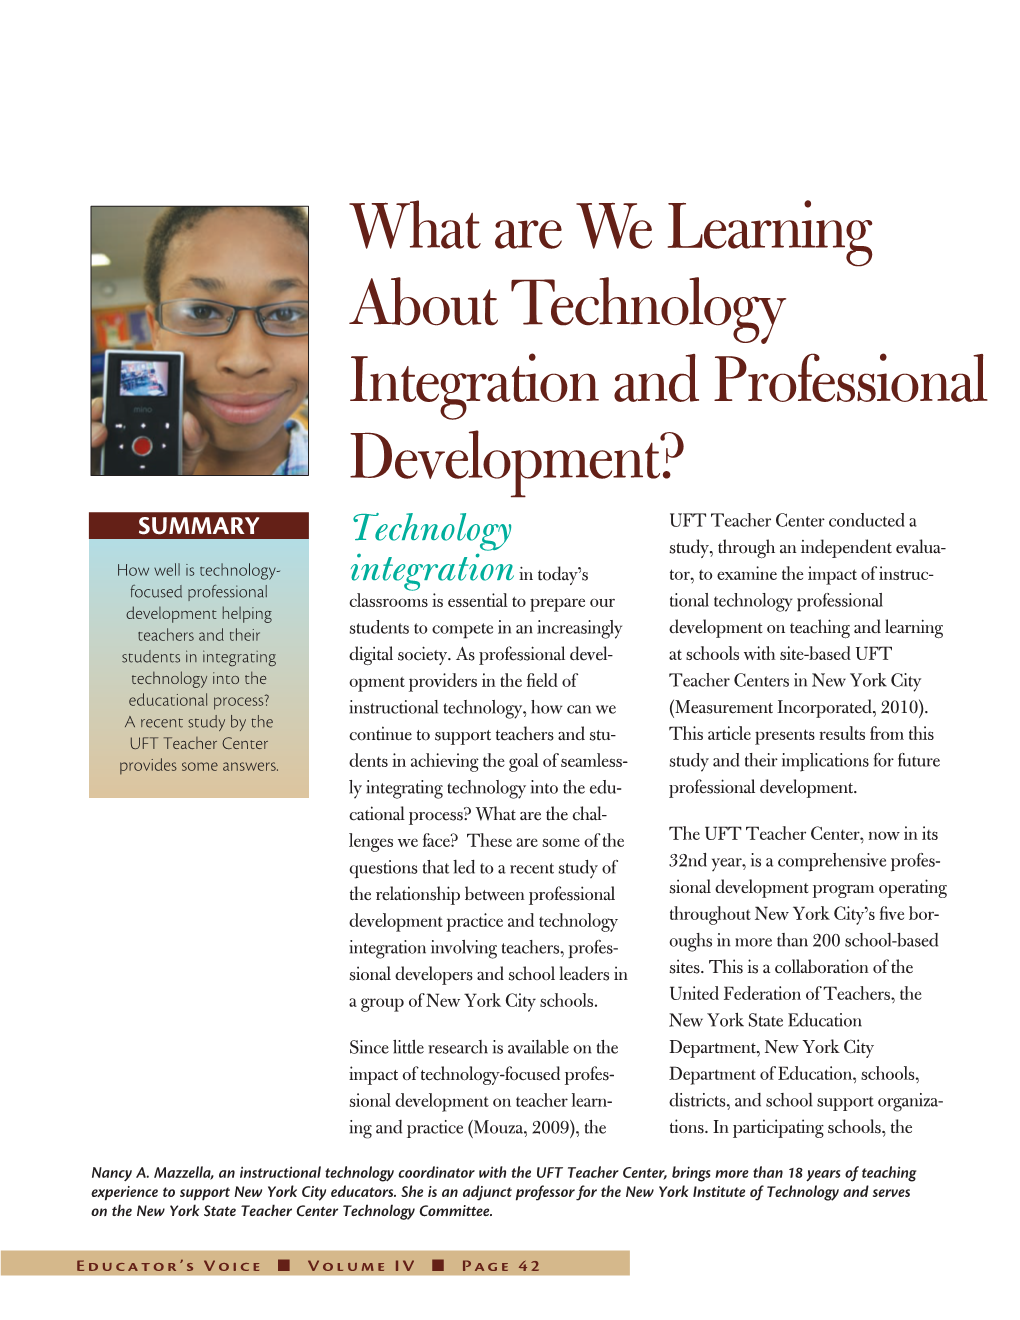 What Are We Learning About Technology Integration and Professional Development?